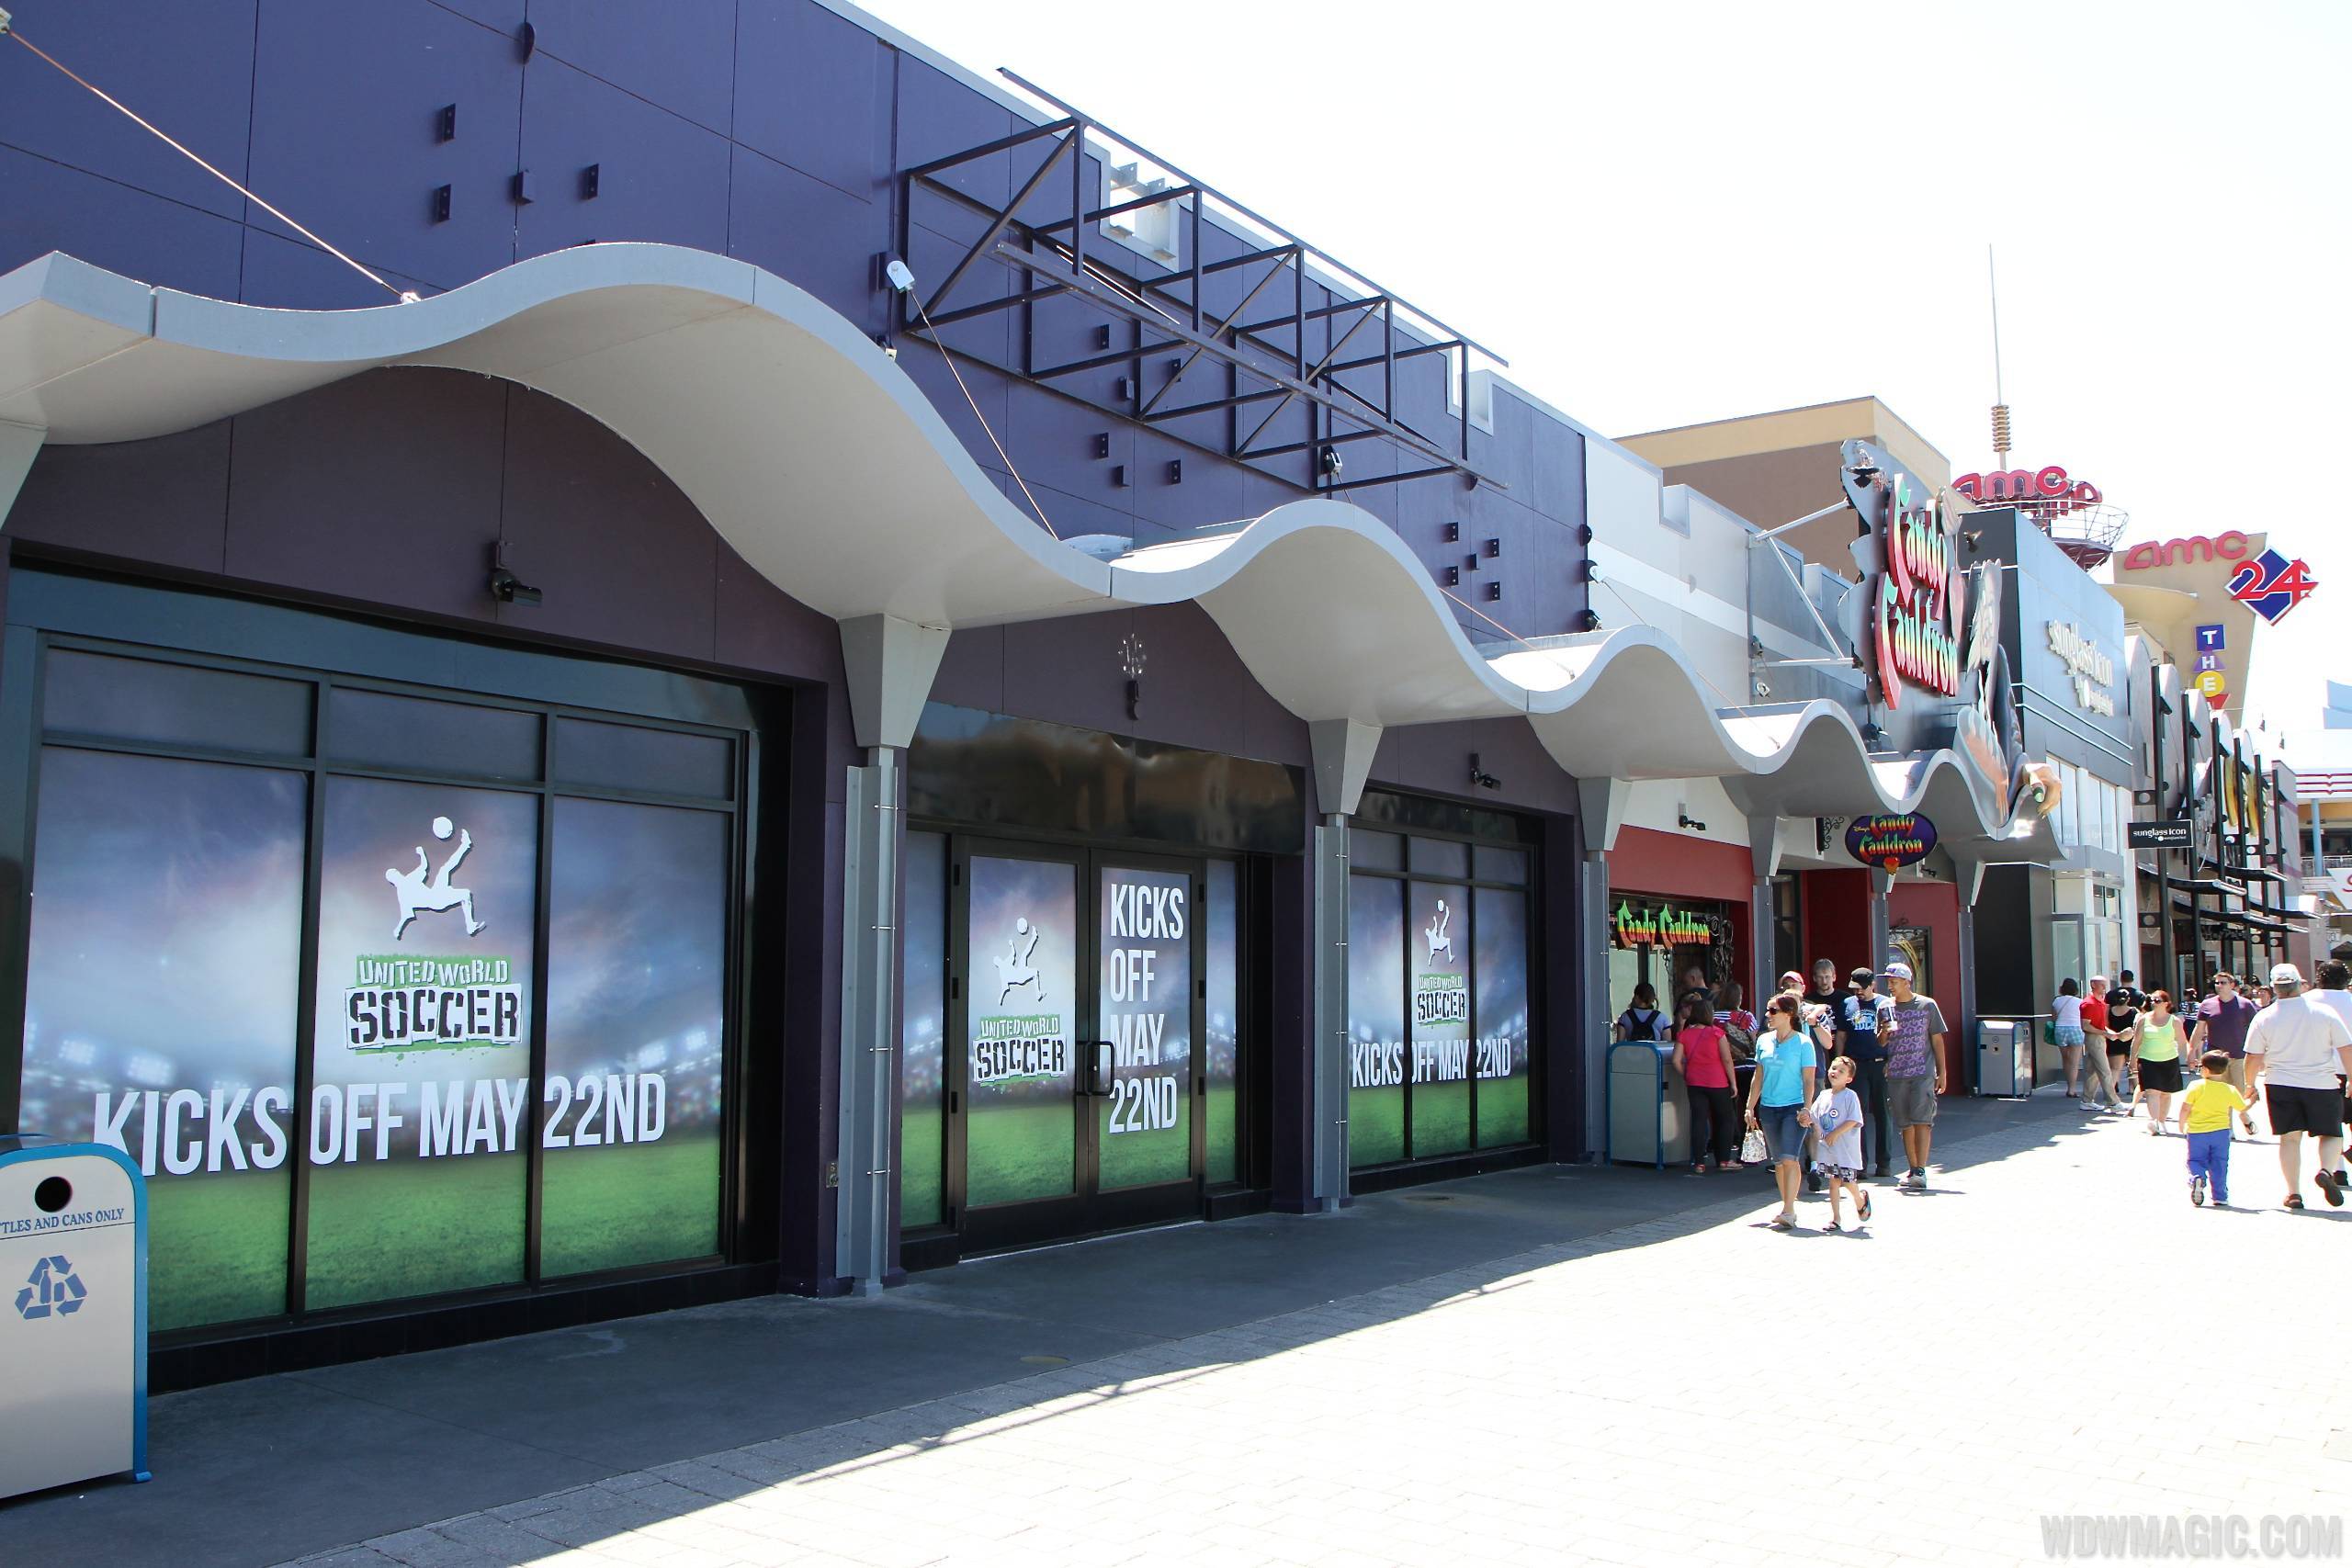 PHOTOS - United World Soccer opens at Downtown Disney West Side on May 22